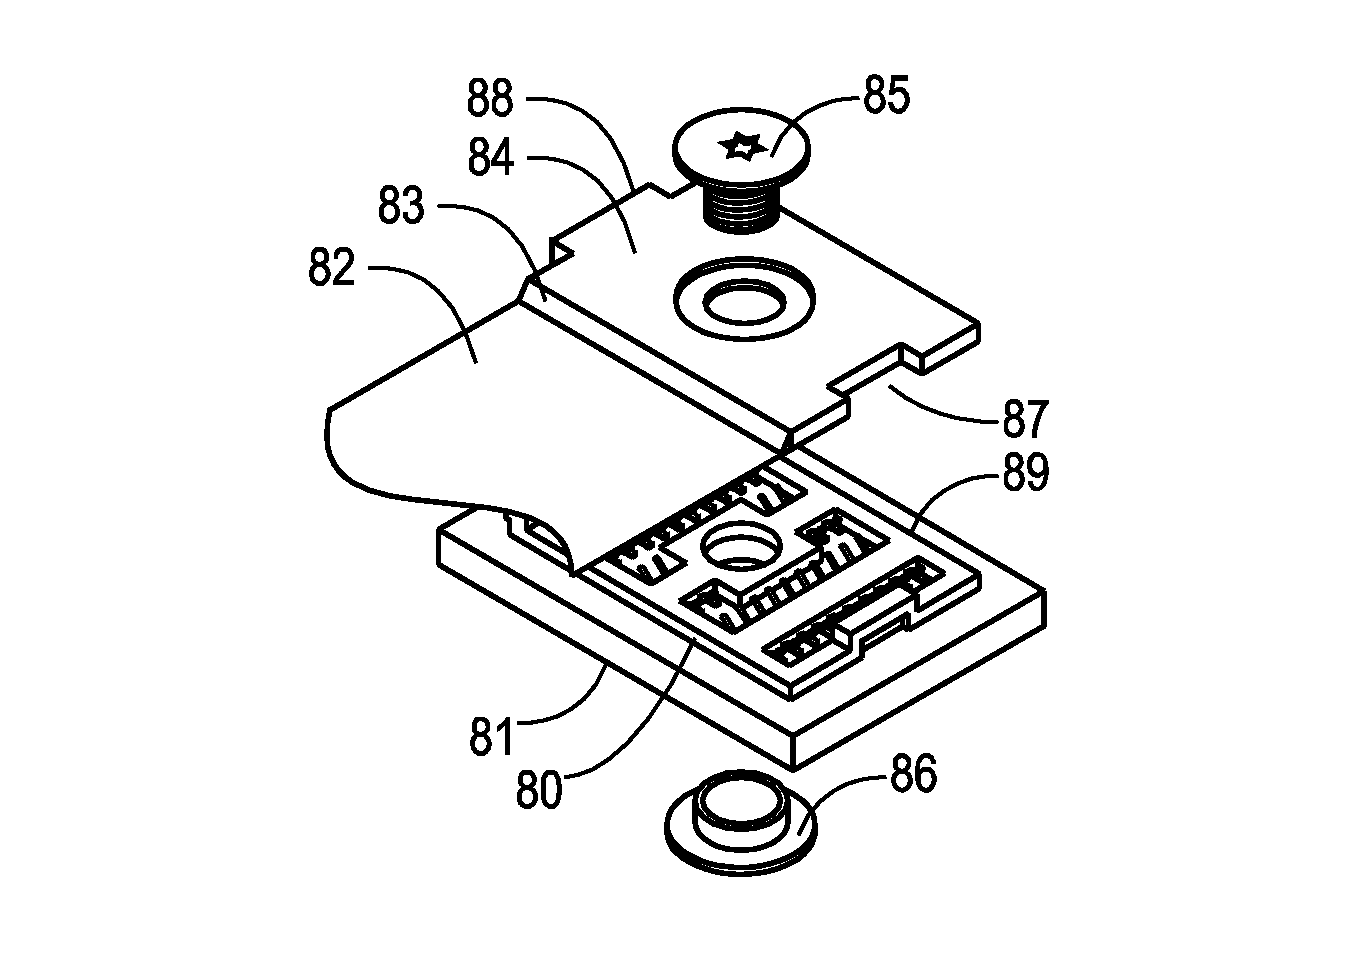 Separable Electrical Connector and Method of Making It